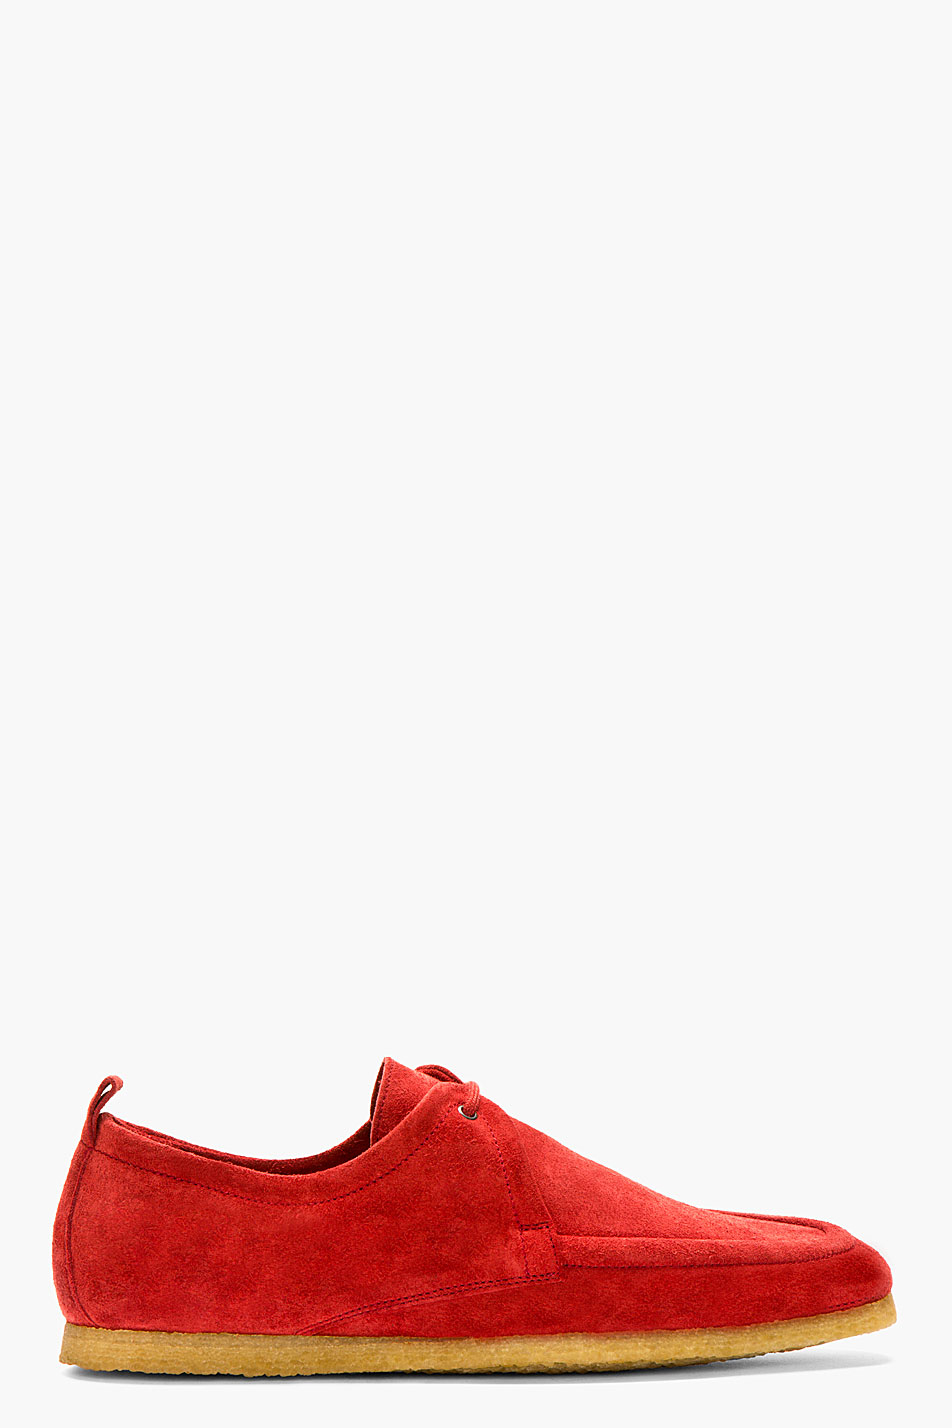 burberry shoes mens red